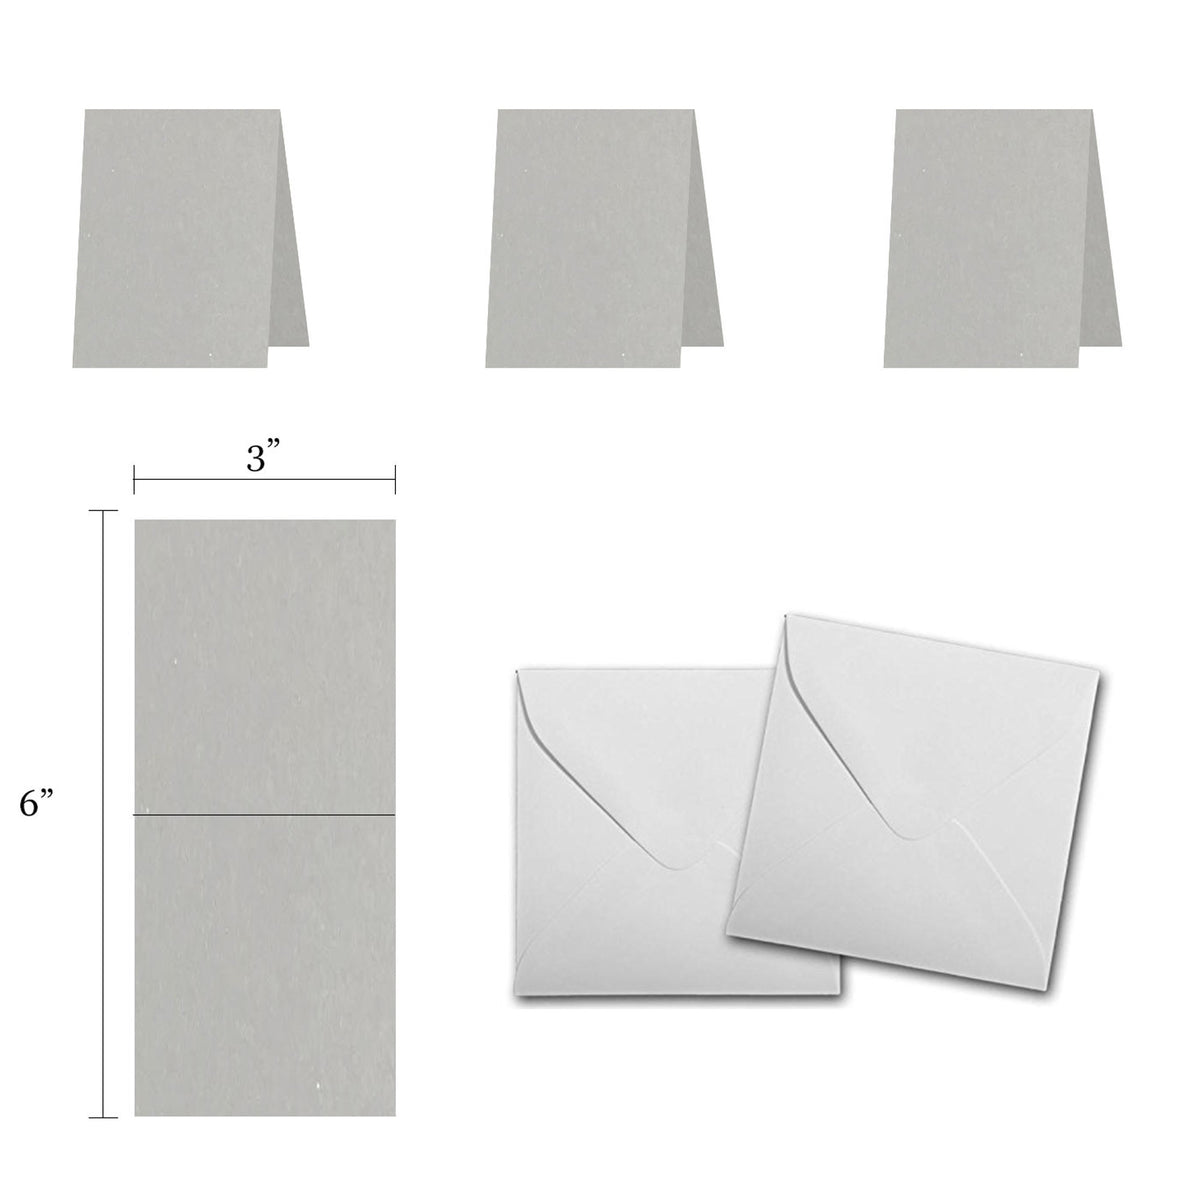 Blank Gray 3x3 Folded Discount Card Stock and Envelopes